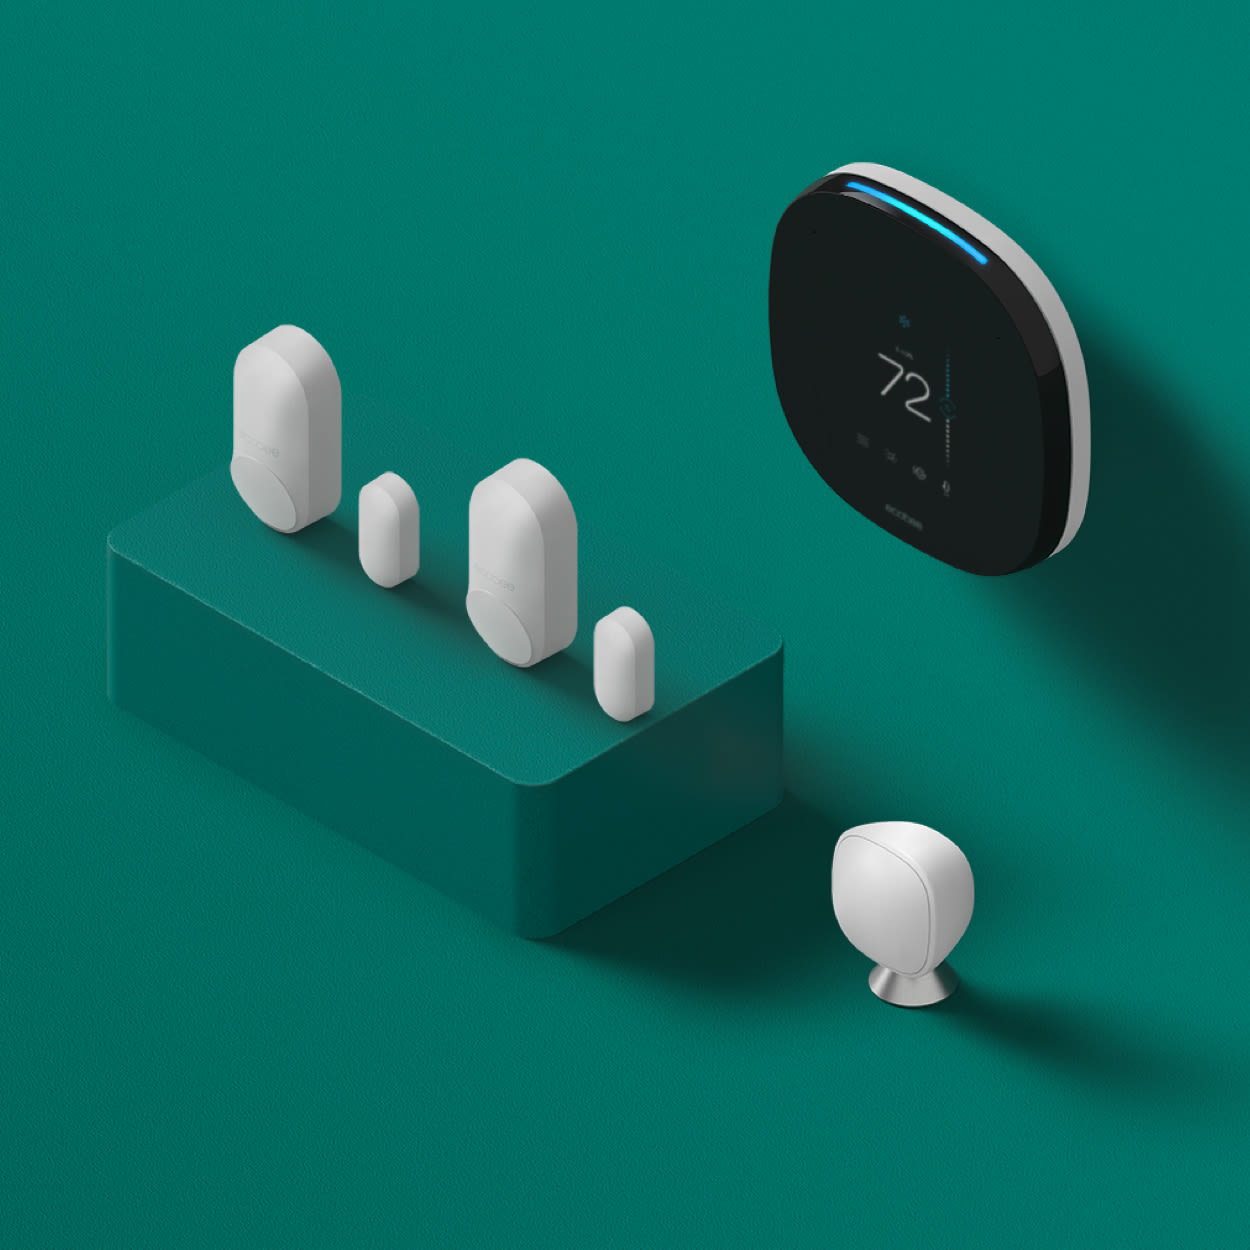 ecobee SmartThermostat with voice control, door and window sensors, and SmartSensors on a green background